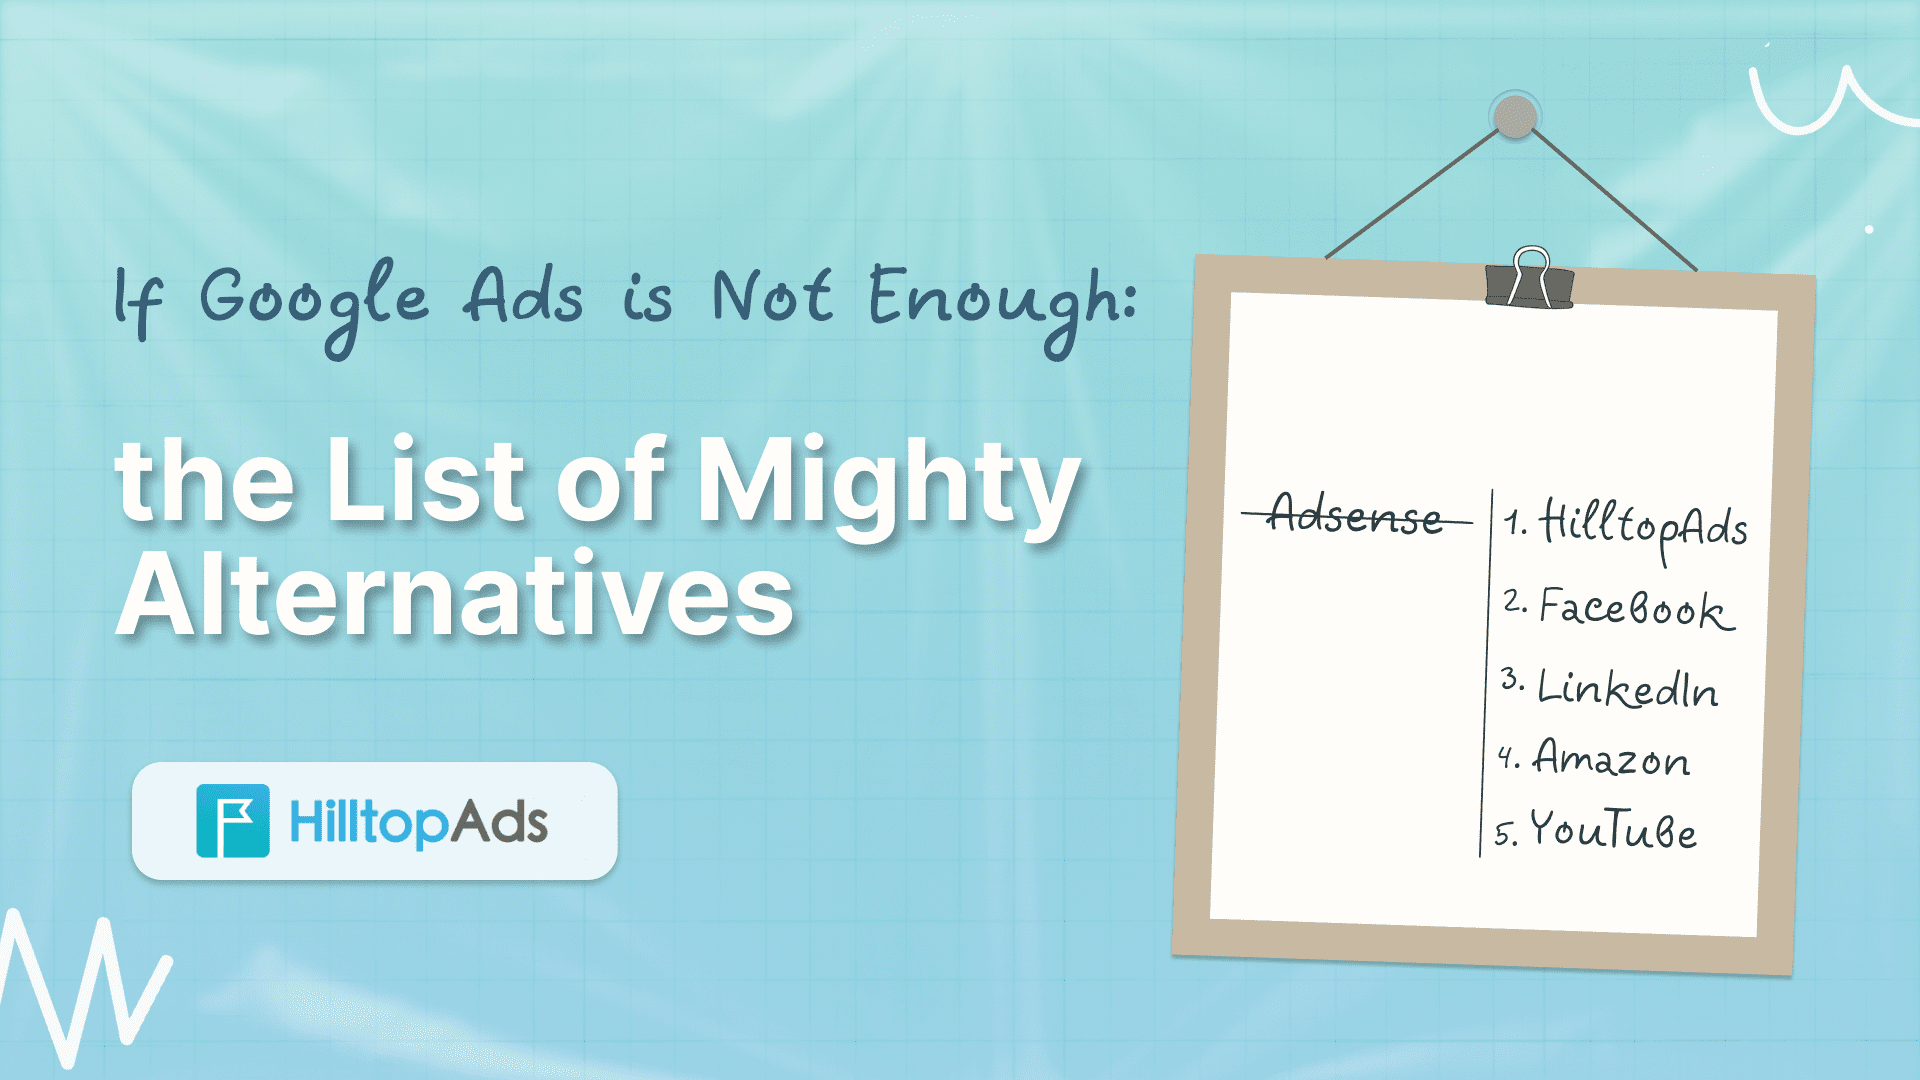 If Google Ads is Not Enough: the List of Mighty Alternatives